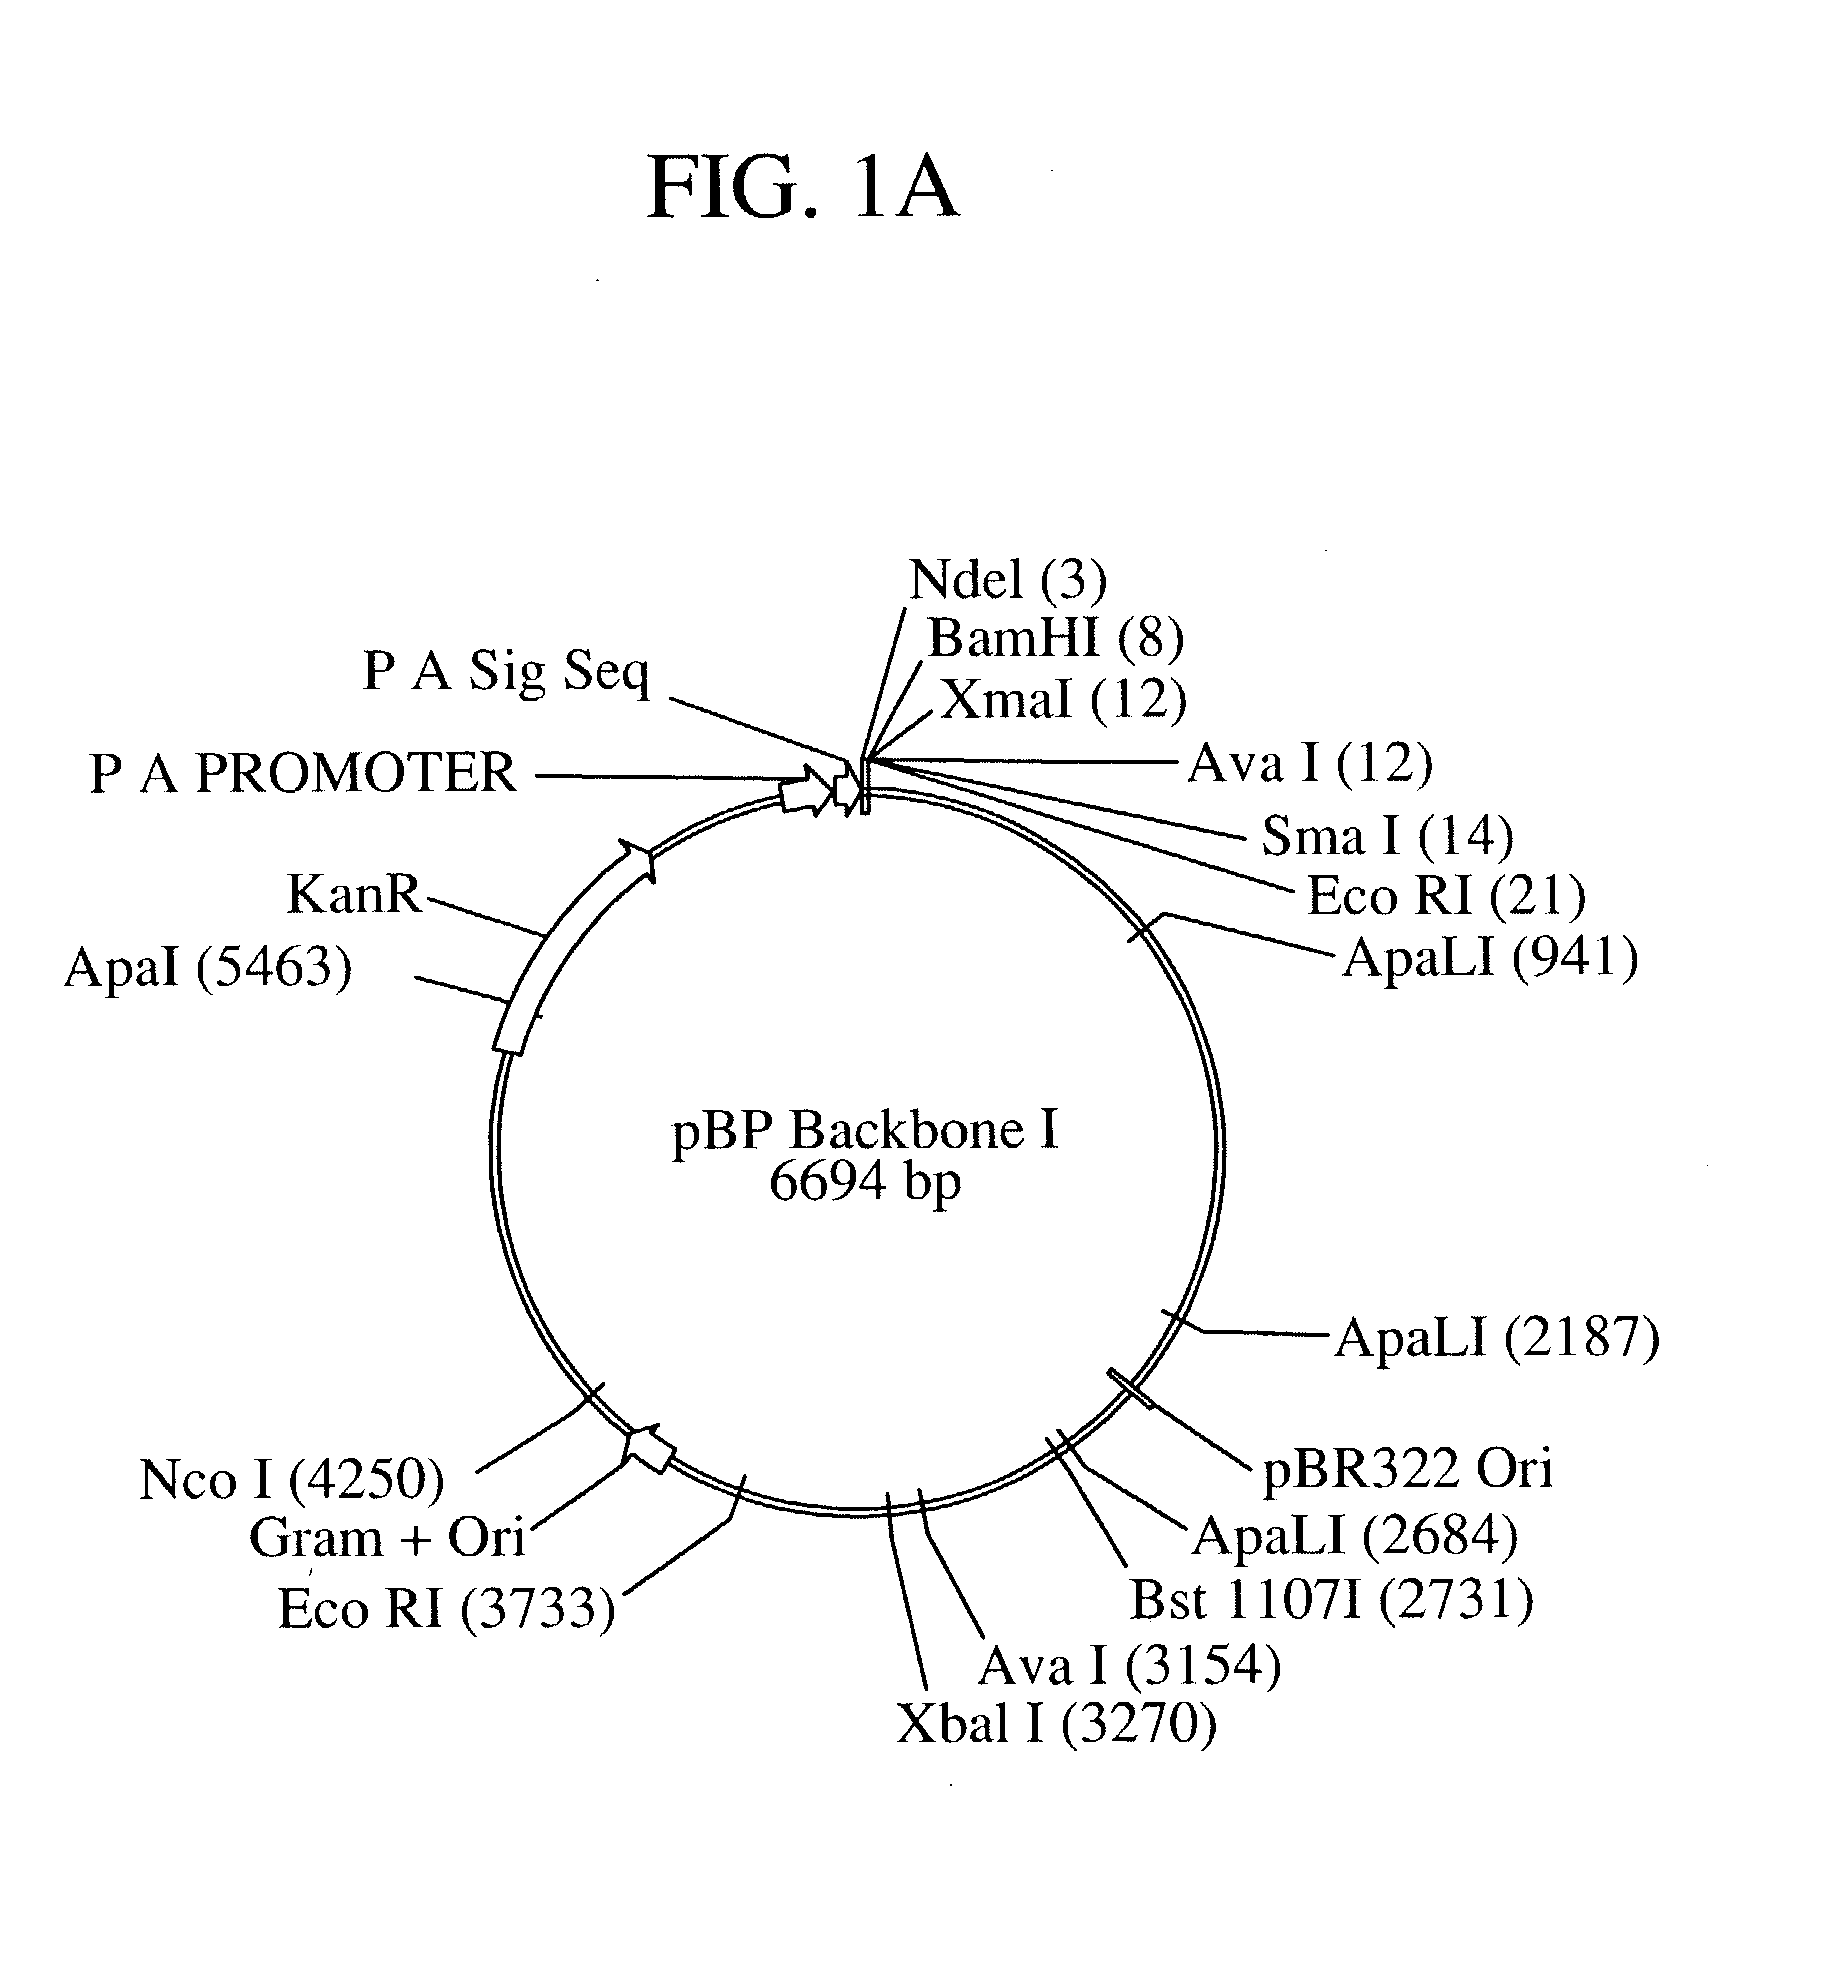 Recombinant immunogenic compositions and methods for protecting against lethal infections from Bacillus anthracis